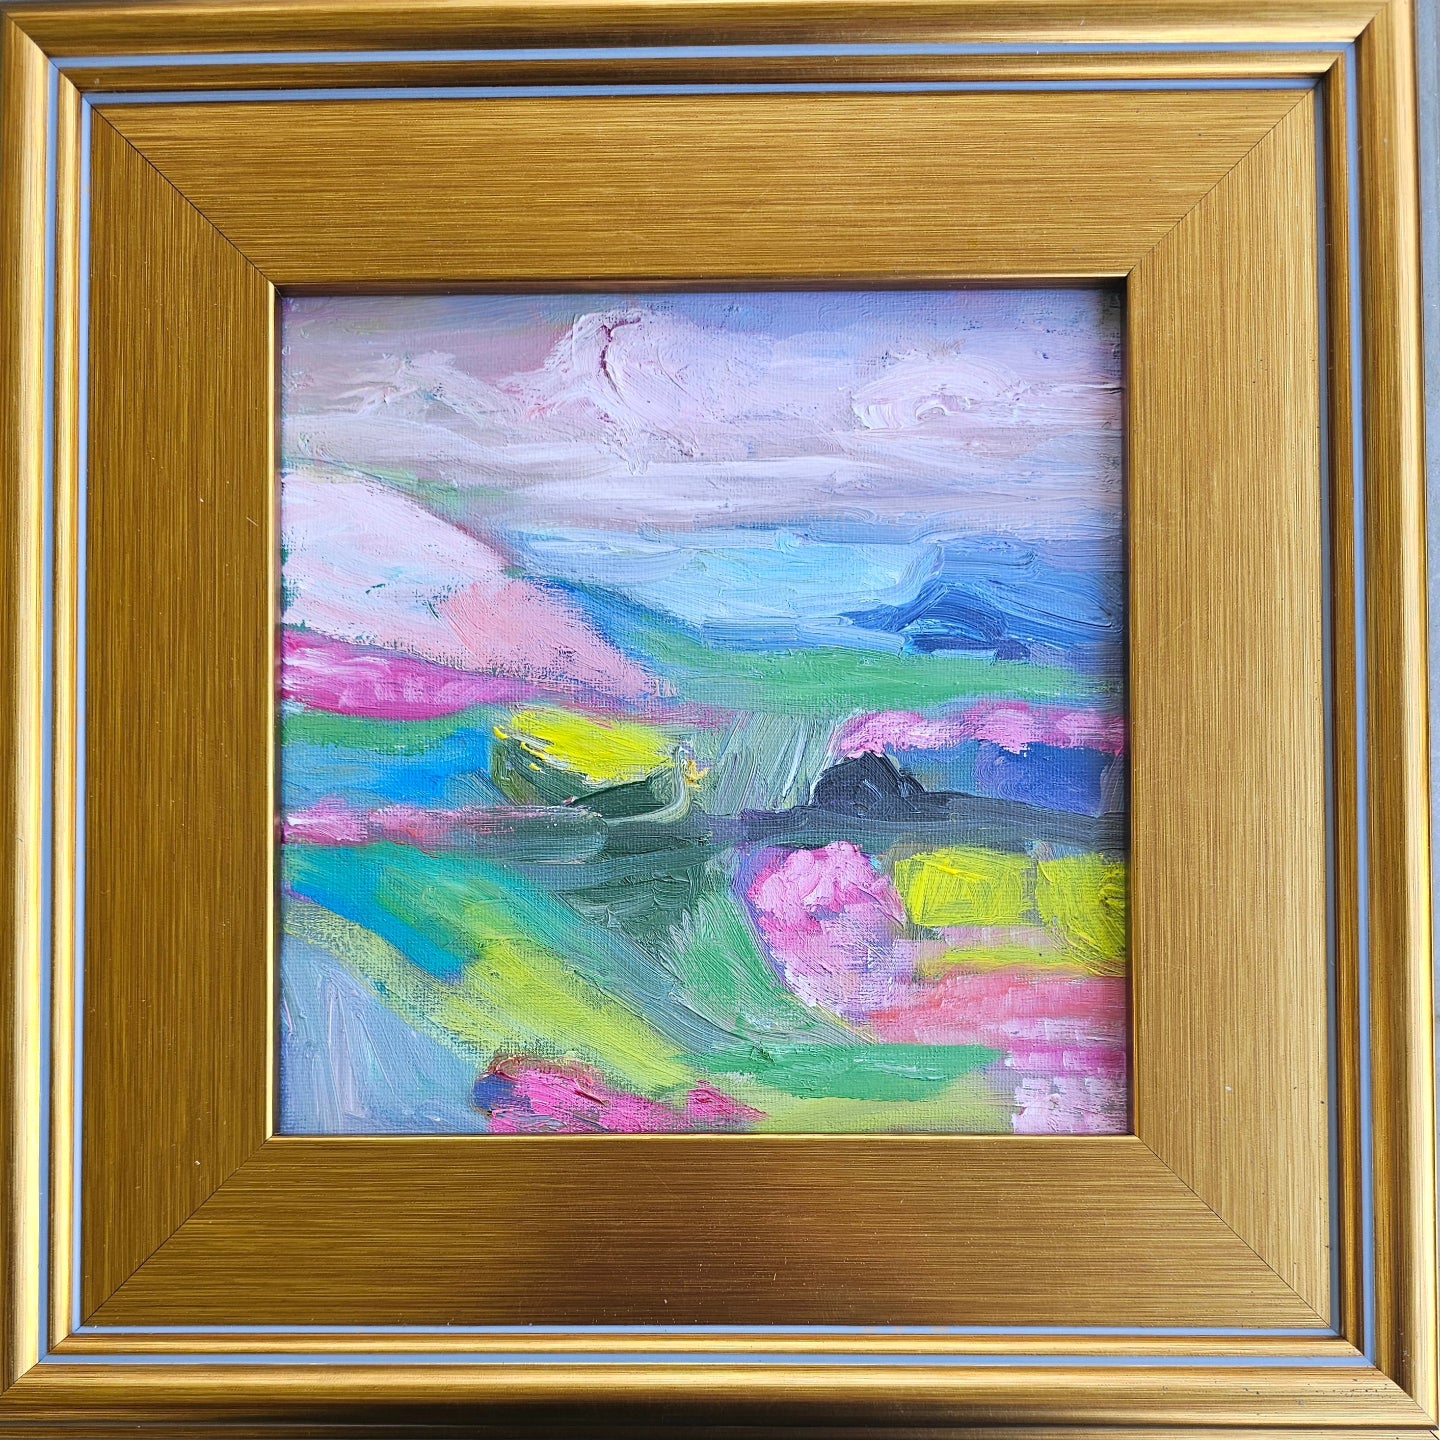 The Valley of Hope 8x8 Oil Painting with Frame